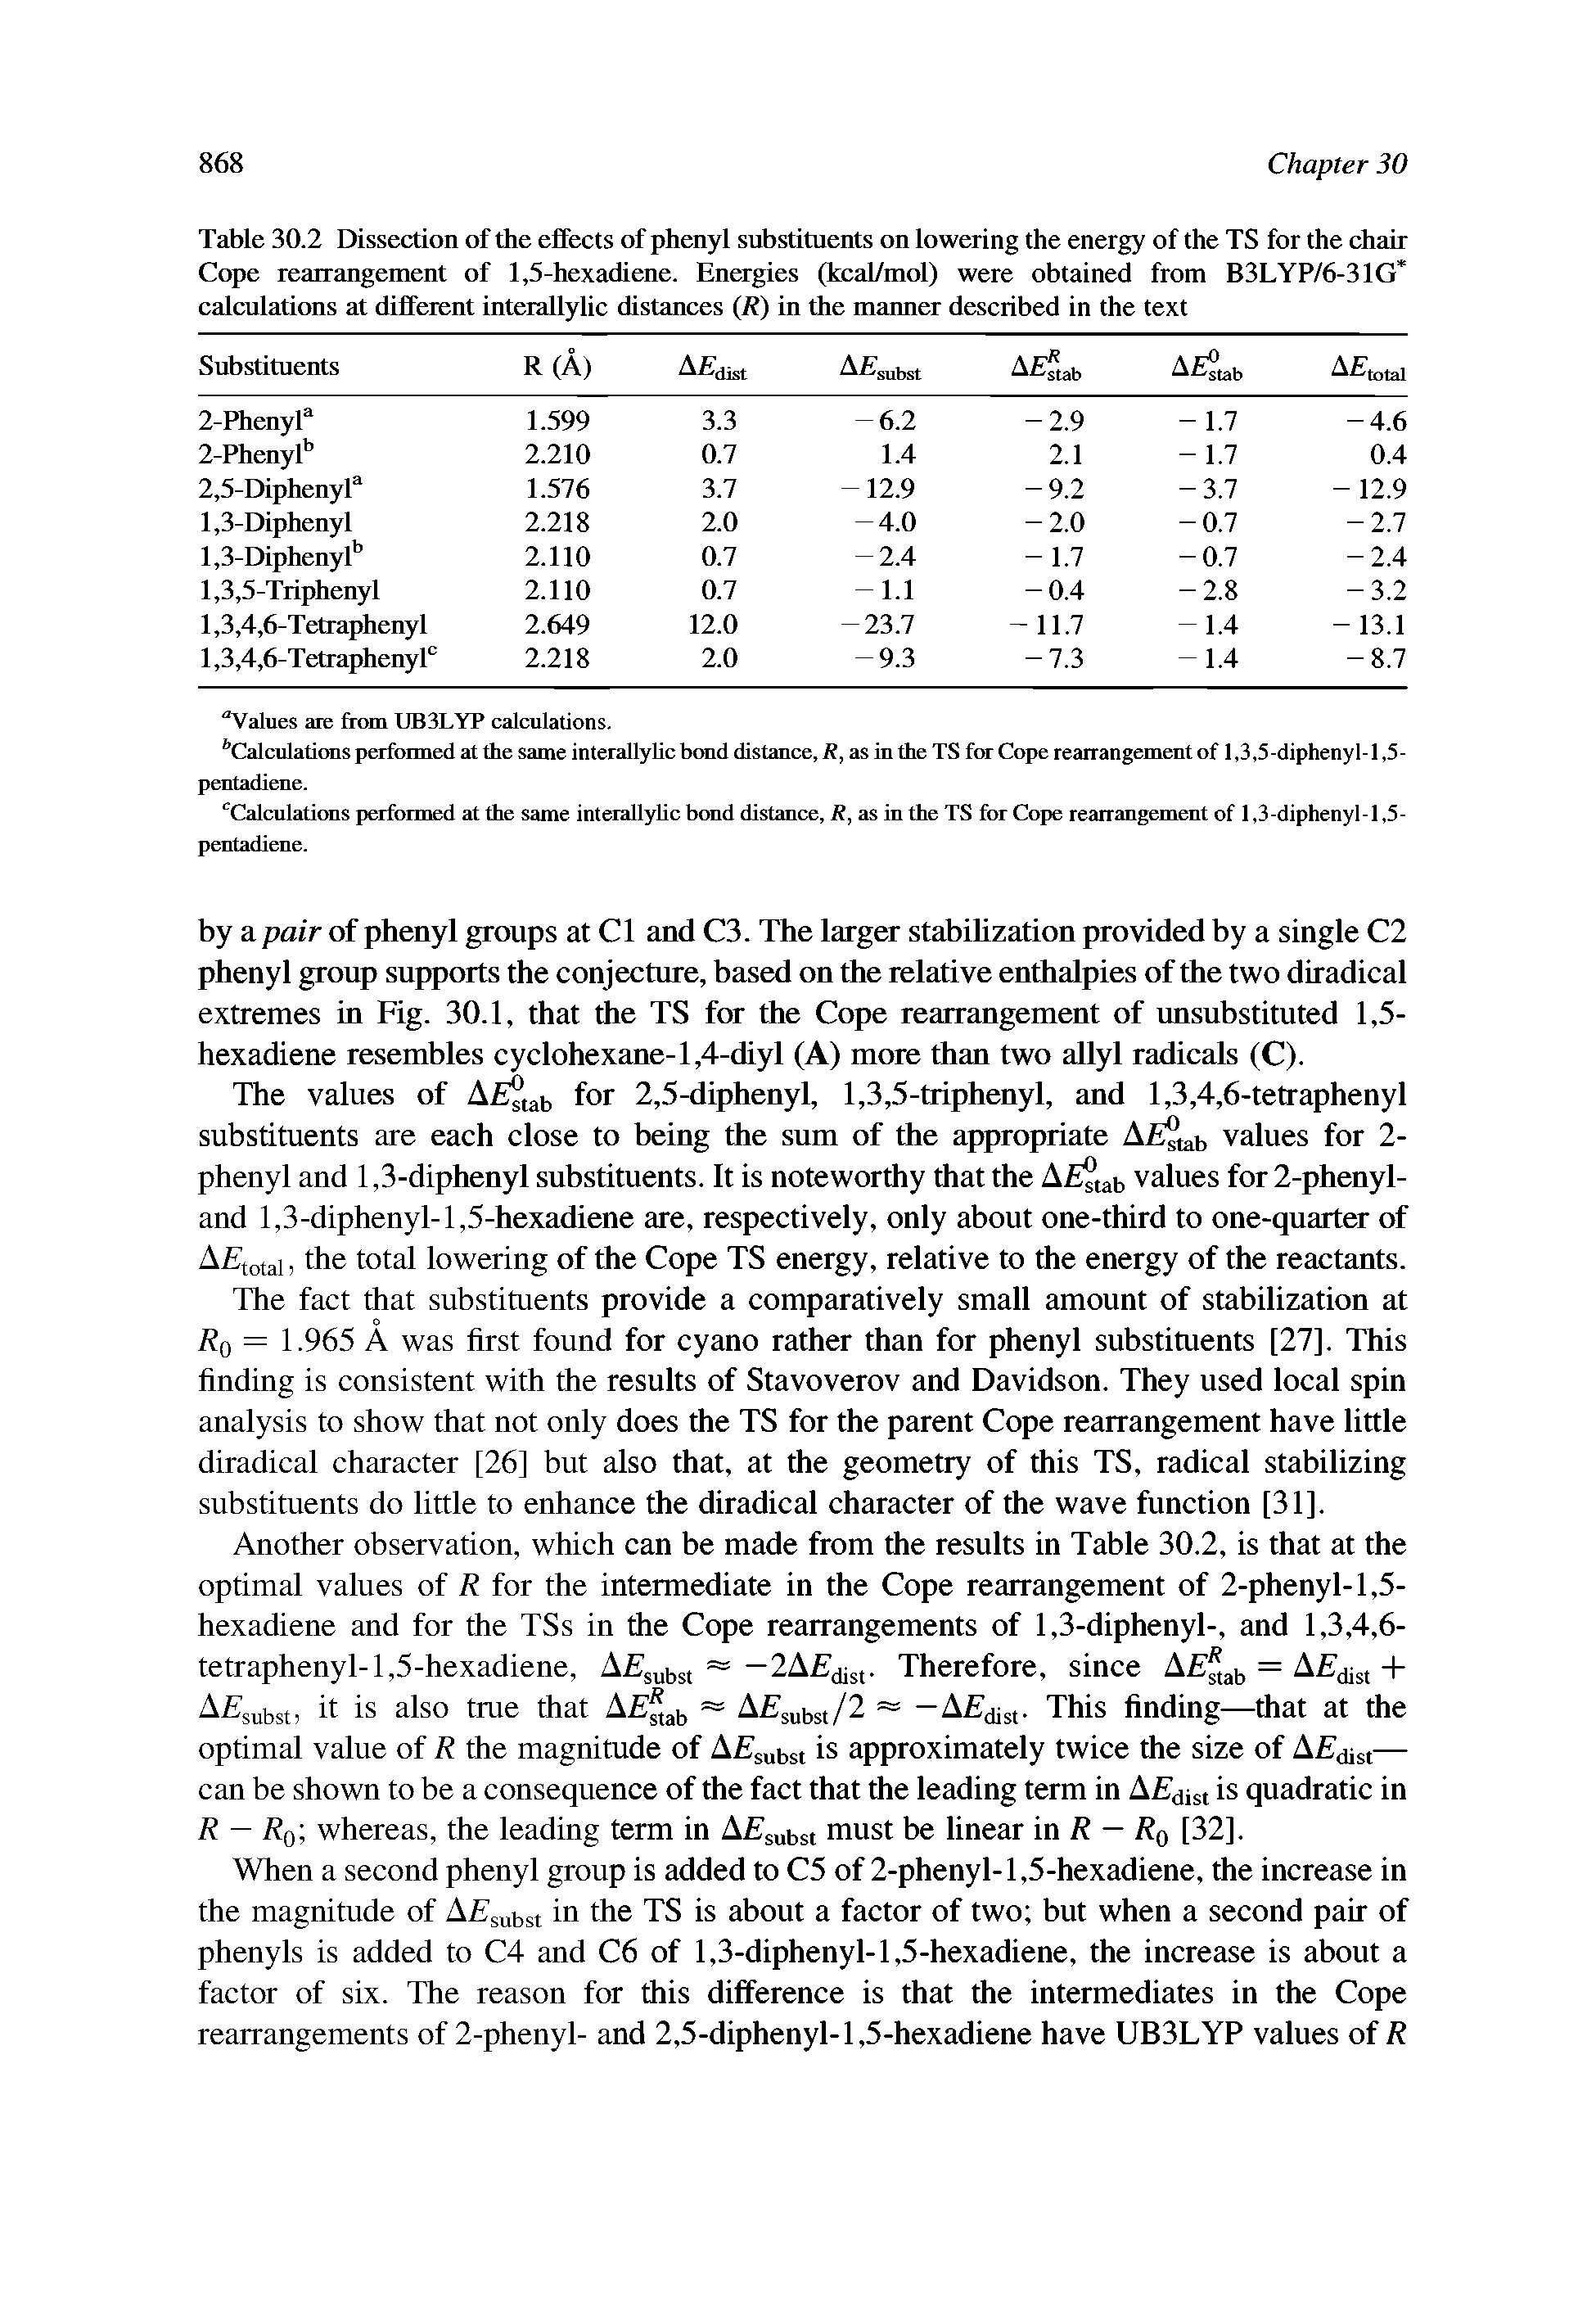 Table 30.2 Dissection of the effects of phenyl substituents on lowering the energy of the TS for the chair Cope rearrangement of 1,5-hexadiene. Energies (kcal/mol) were obtained from B3LYP/6-31G calculations at different interallylic distances (R) in the maimer described in the text...